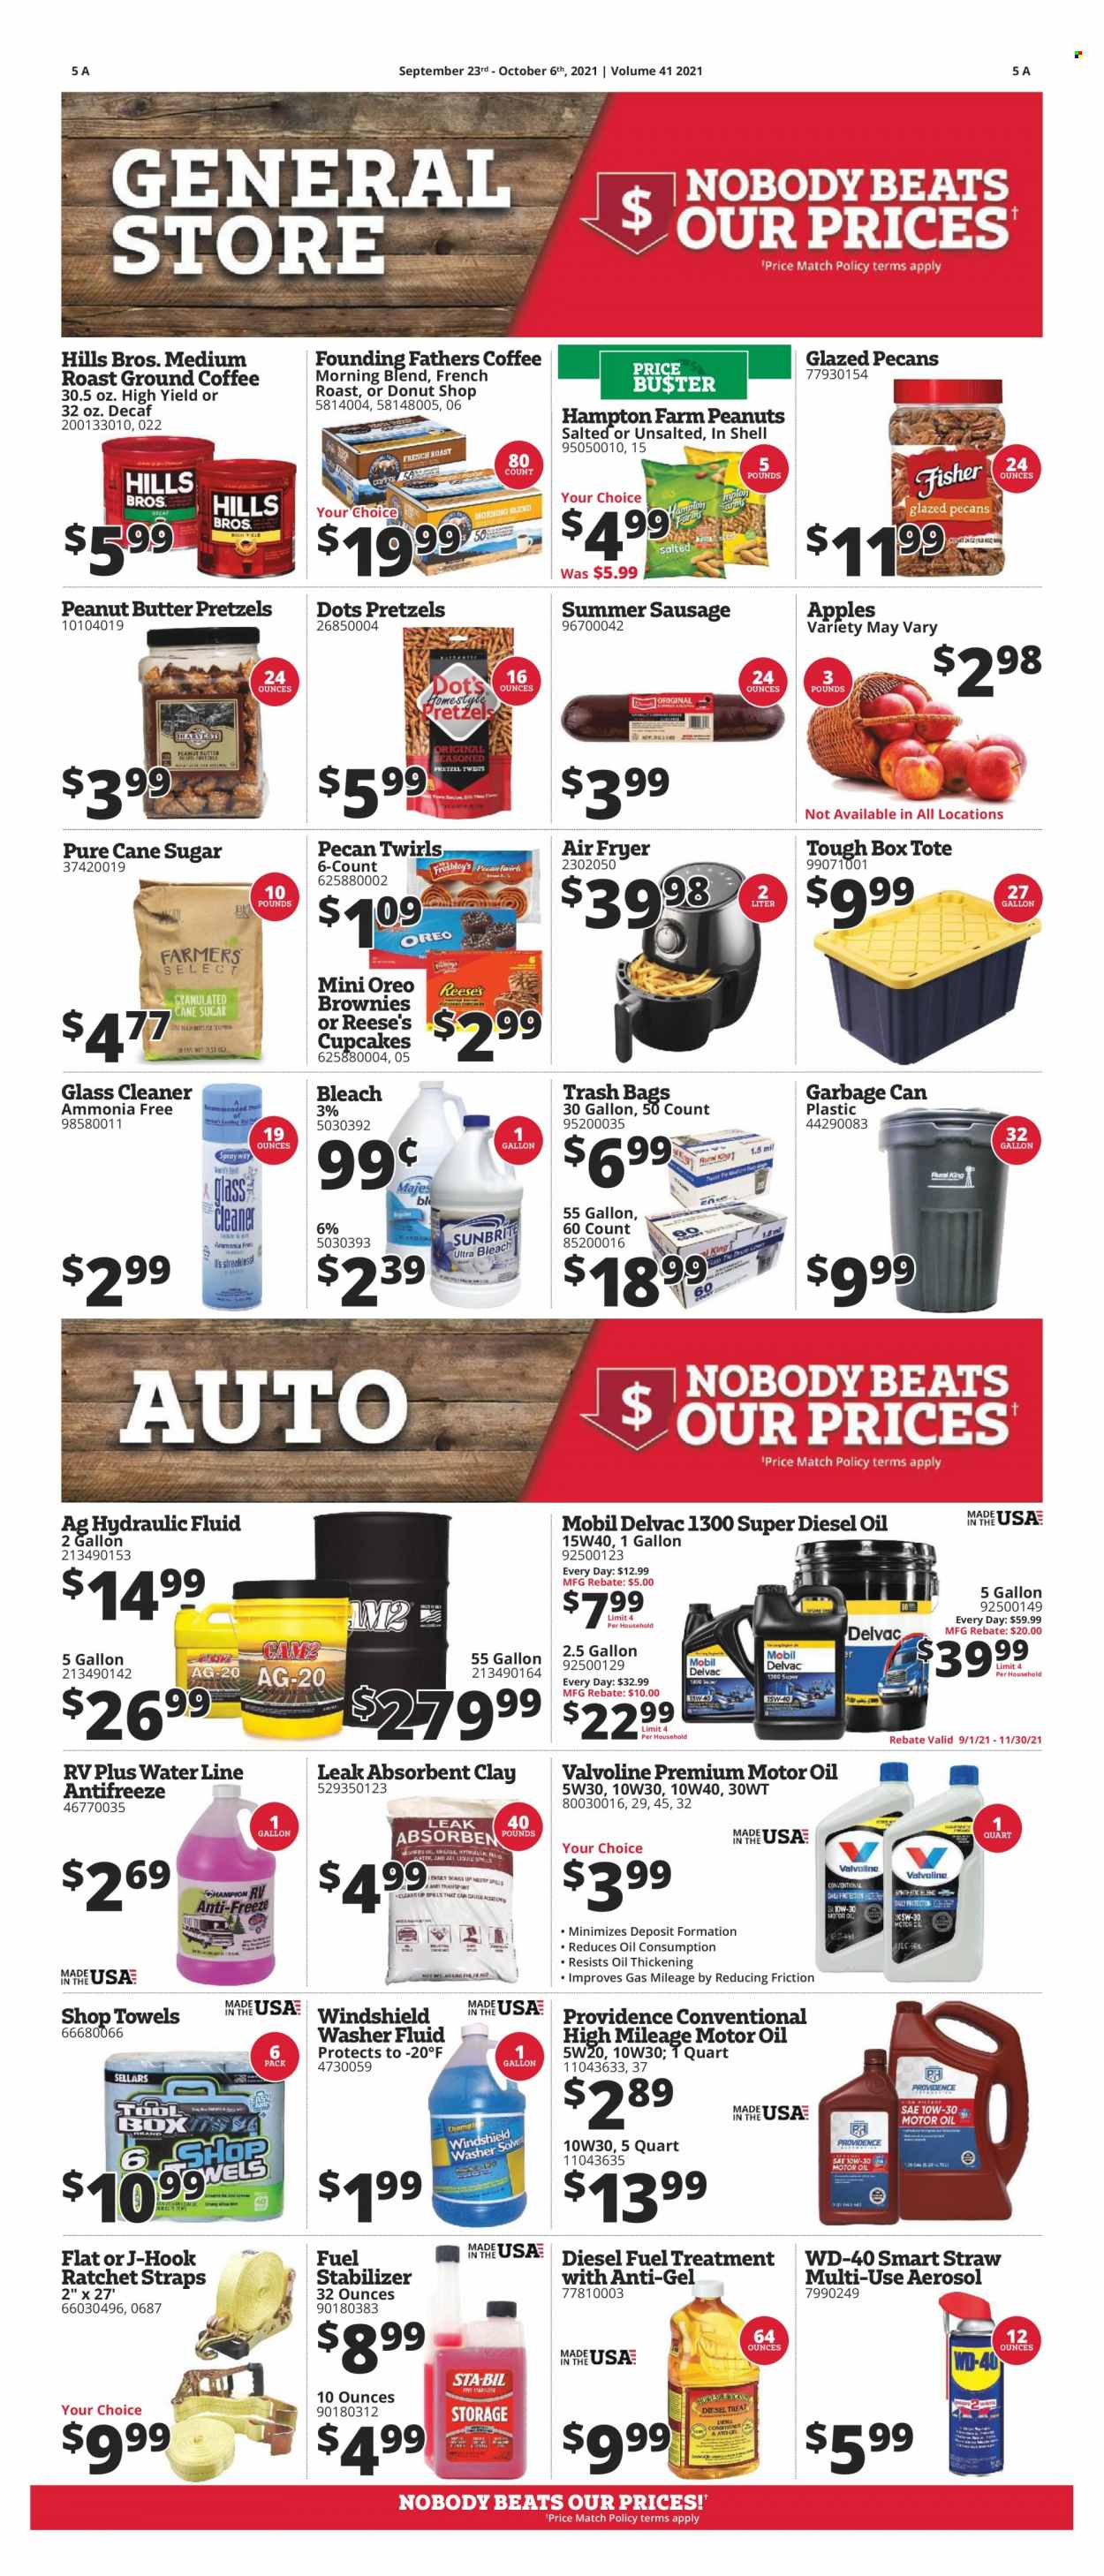 thumbnail - Rural King Flyer - 09/23/2021 - 10/06/2021 - Sales products - pretzels, Oreo, brownies, Reese's, cane sugar, sugar, peanut butter, peanuts, pecans, coffee, ground coffee, bleach, trash bags, hook, straw, towel, Hill's, air fryer, tote, WD-40, cleaner, antifreeze, washer fluid, fuel stabilizer, Mobil, motor oil, Shell, fuel supplement, Valvoline, hydraulic fluids, diesel oil. Page 9.